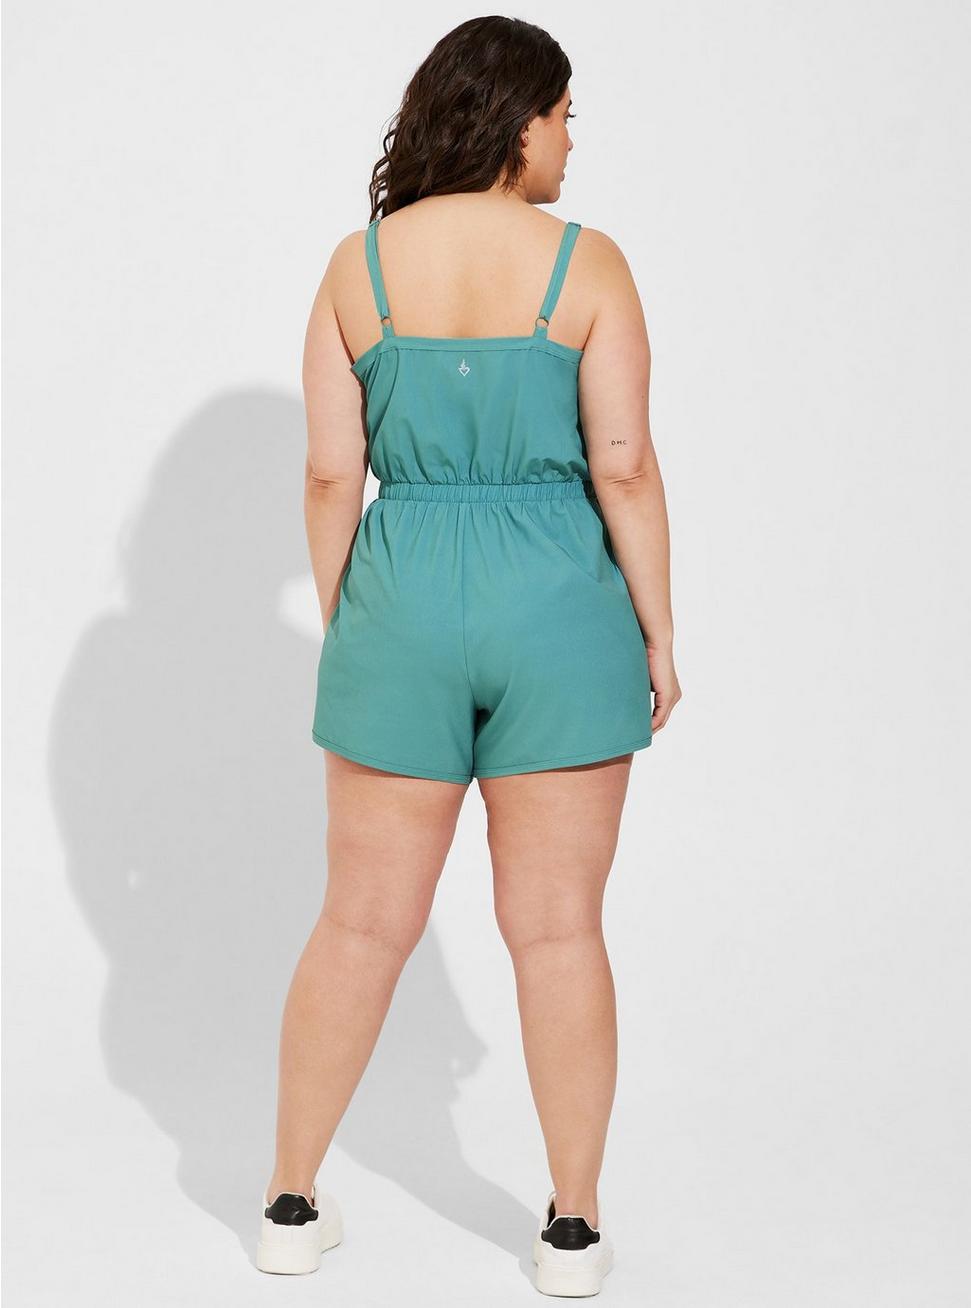 Stretch Woven Active Romper With Pockets, DEEP SEA, alternate